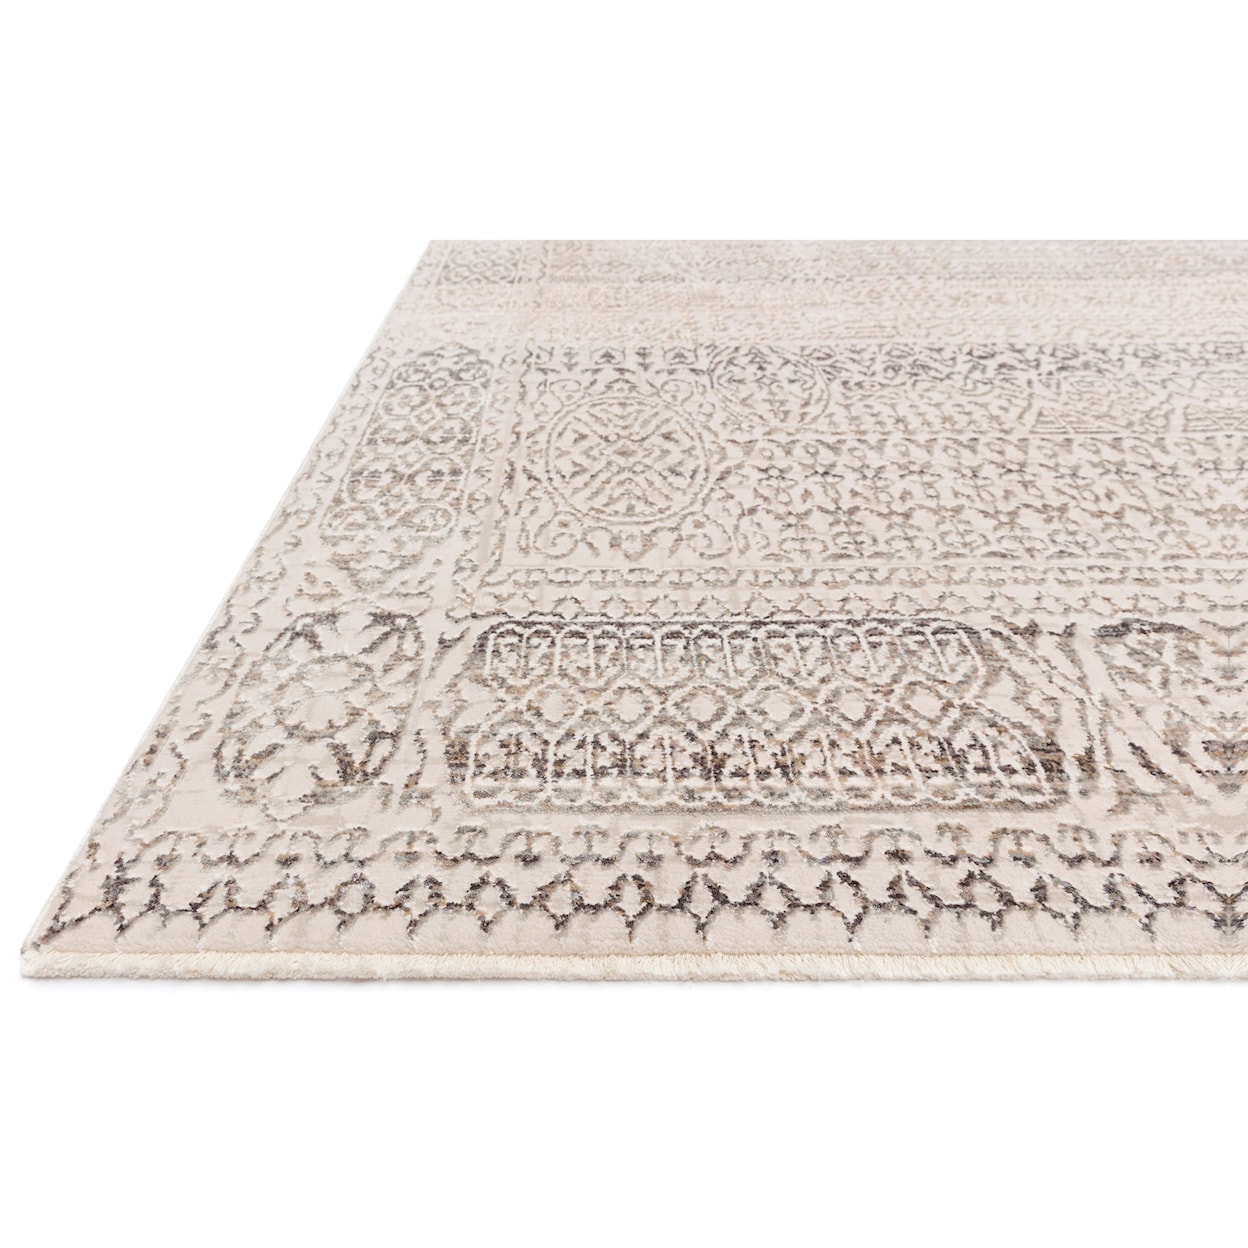 Reeds Rugs Homage 2'6" x 8'0" Ivory / Silver Rug